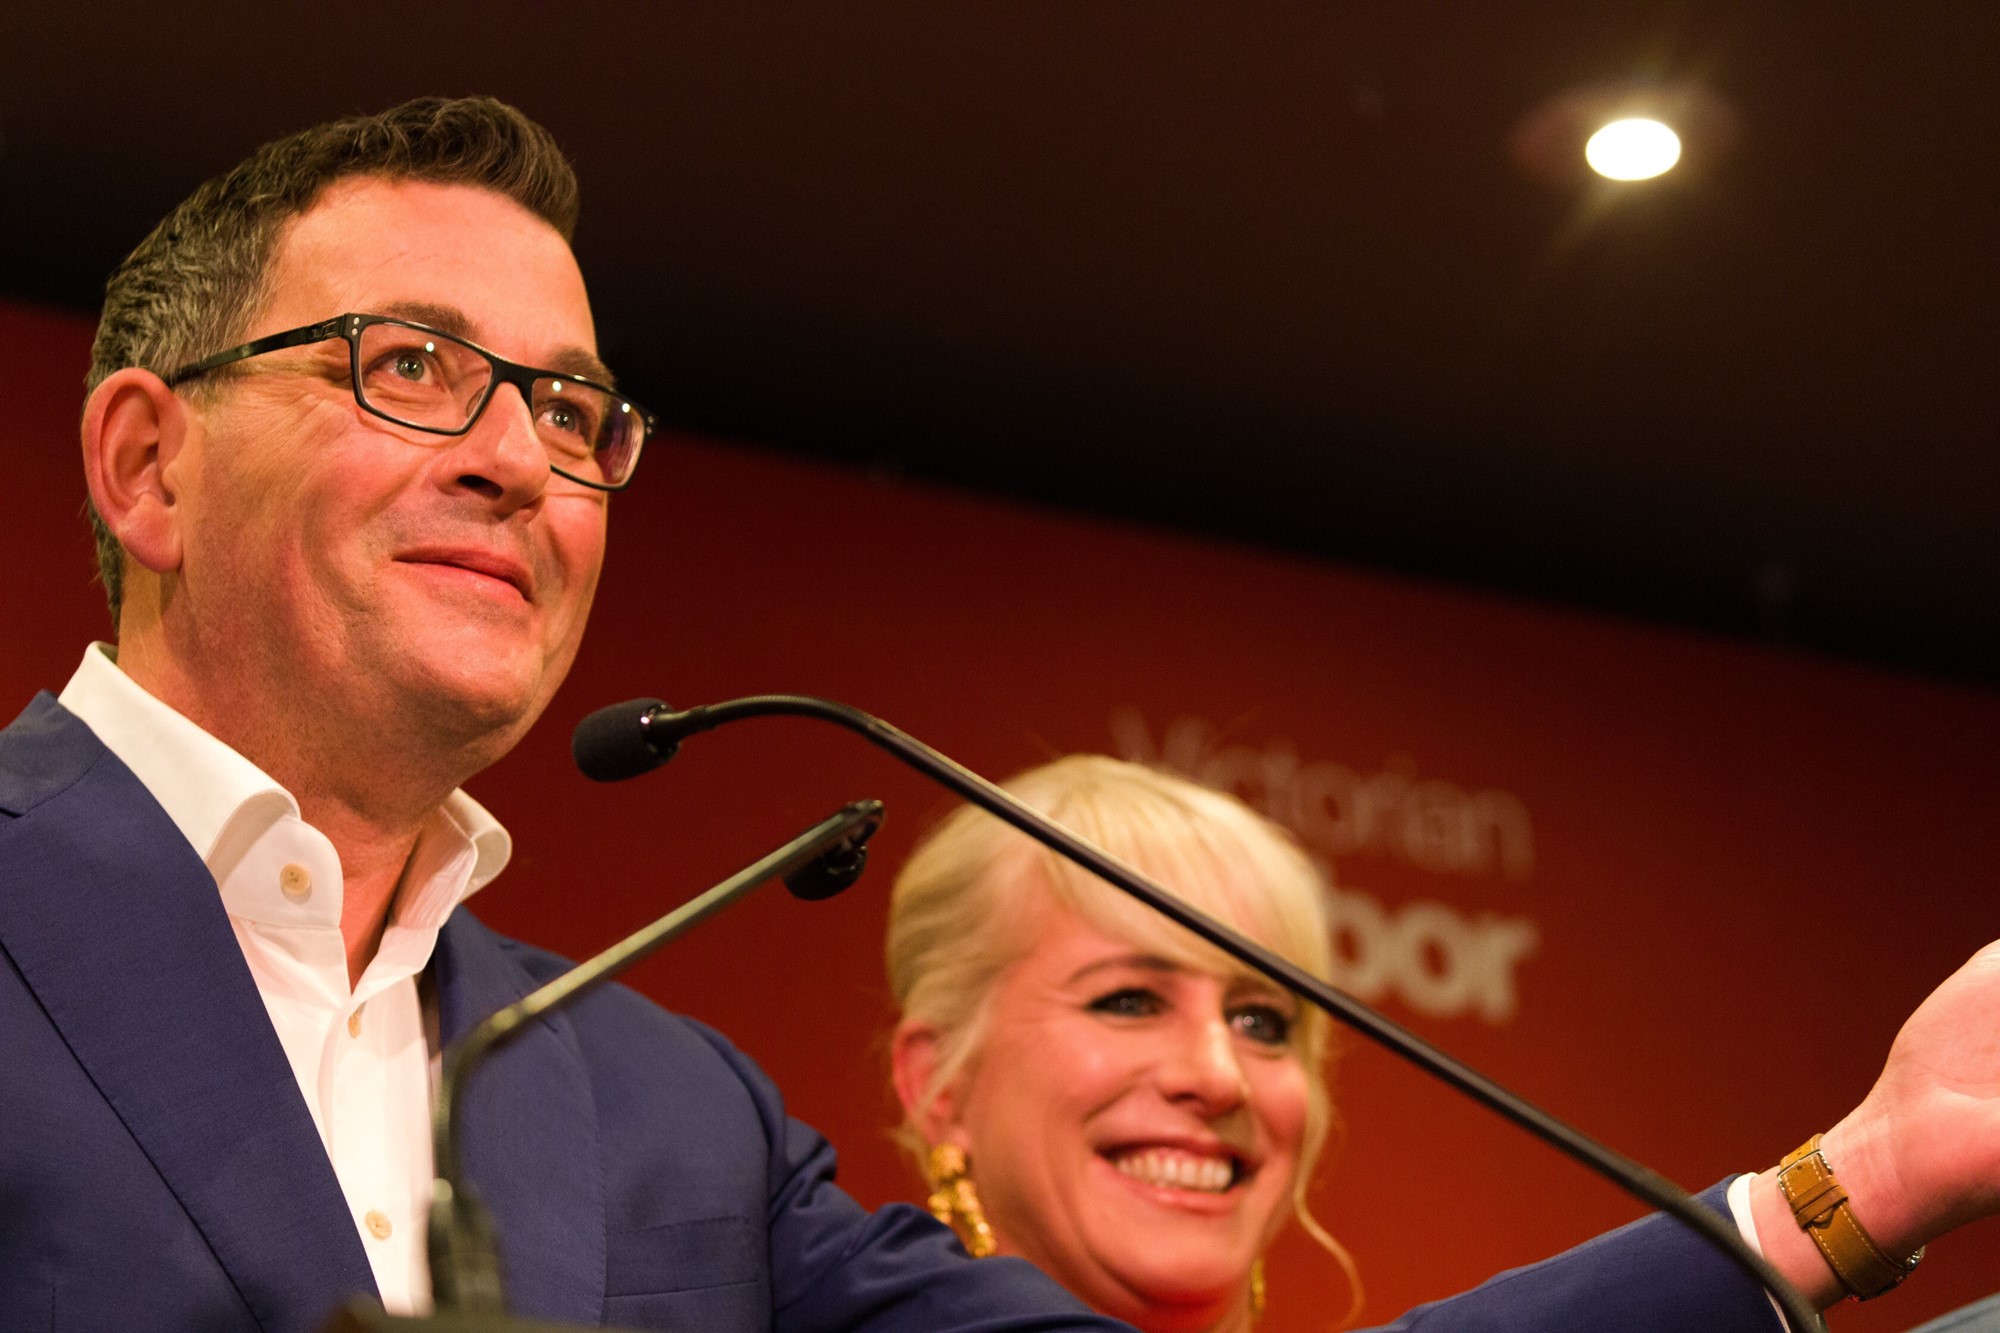 Dan Andrews speaks into a mic with his wife behind him.